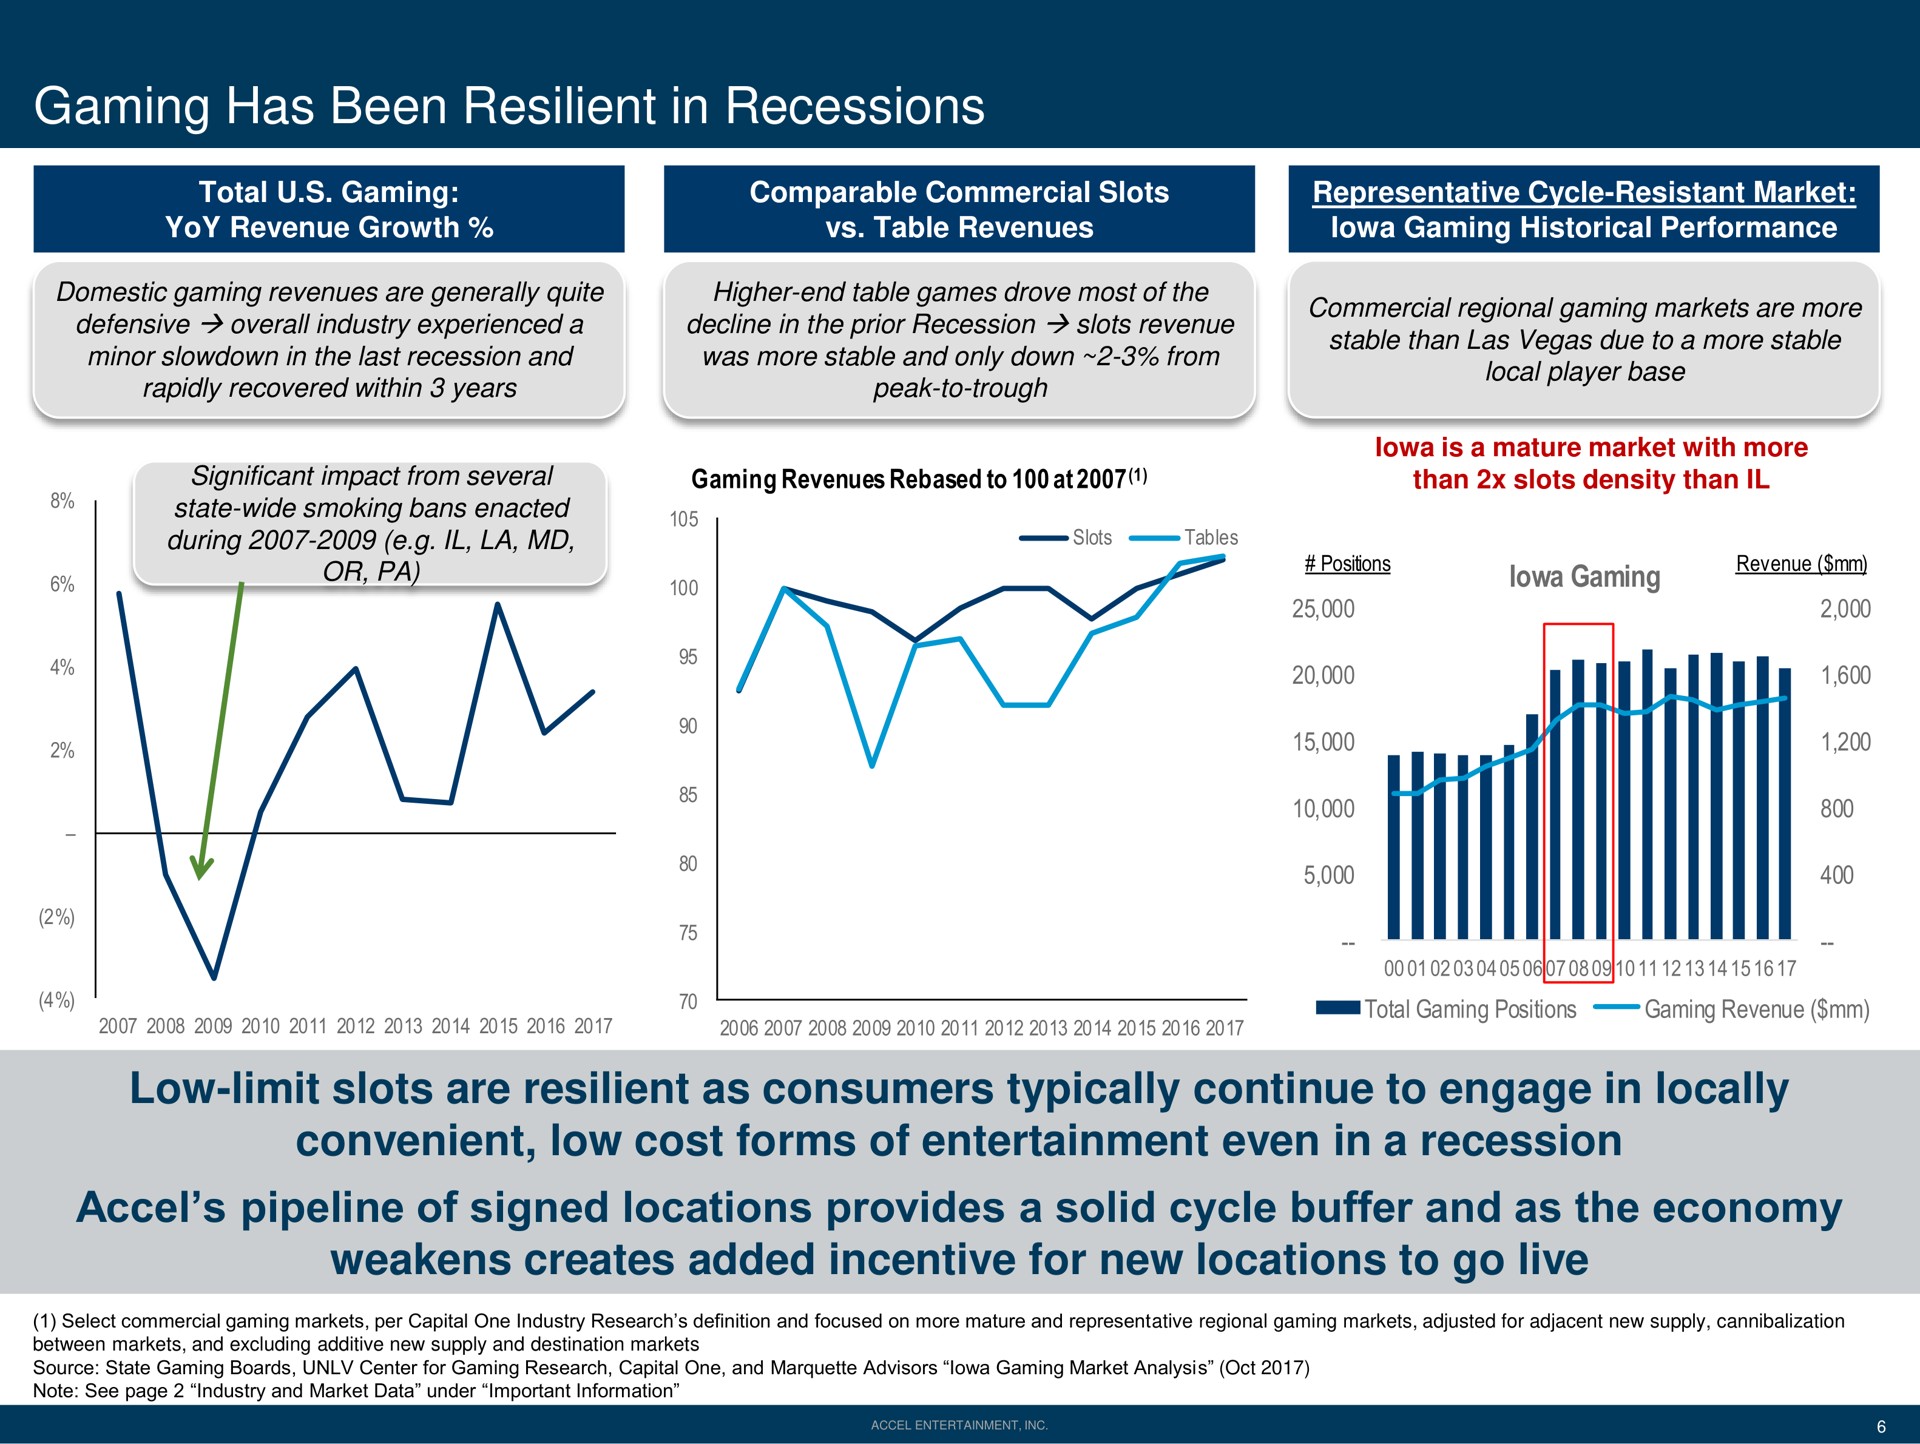 gaming has been resilient in recessions low limit slots are resilient as consumers typically continue to engage in locally convenient low cost forms of entertainment even in a recession pipeline of signed locations provides a solid cycle buffer and as the economy weakens creates added incentive for new locations to go live | Accel Entertaiment